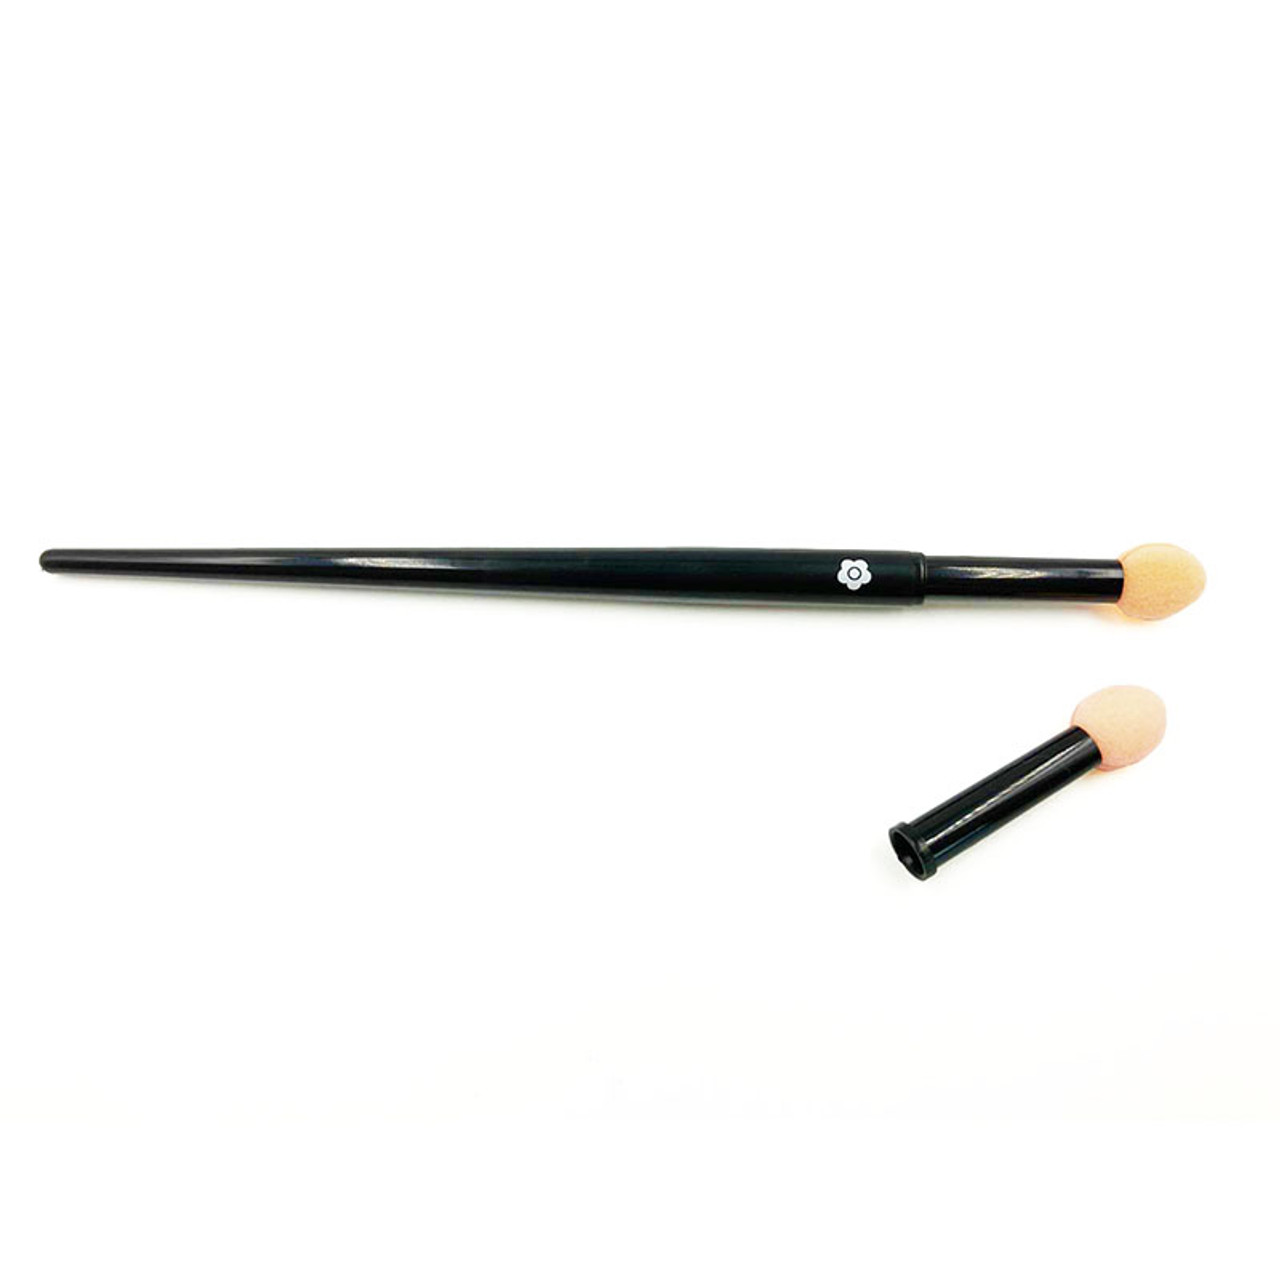 The Eyebrow Tip is pictured, it has a sponge applicator and a long black handle with the Mary Quant Daisy printed on it. It comes with a spare applicator tip which is also pictured.